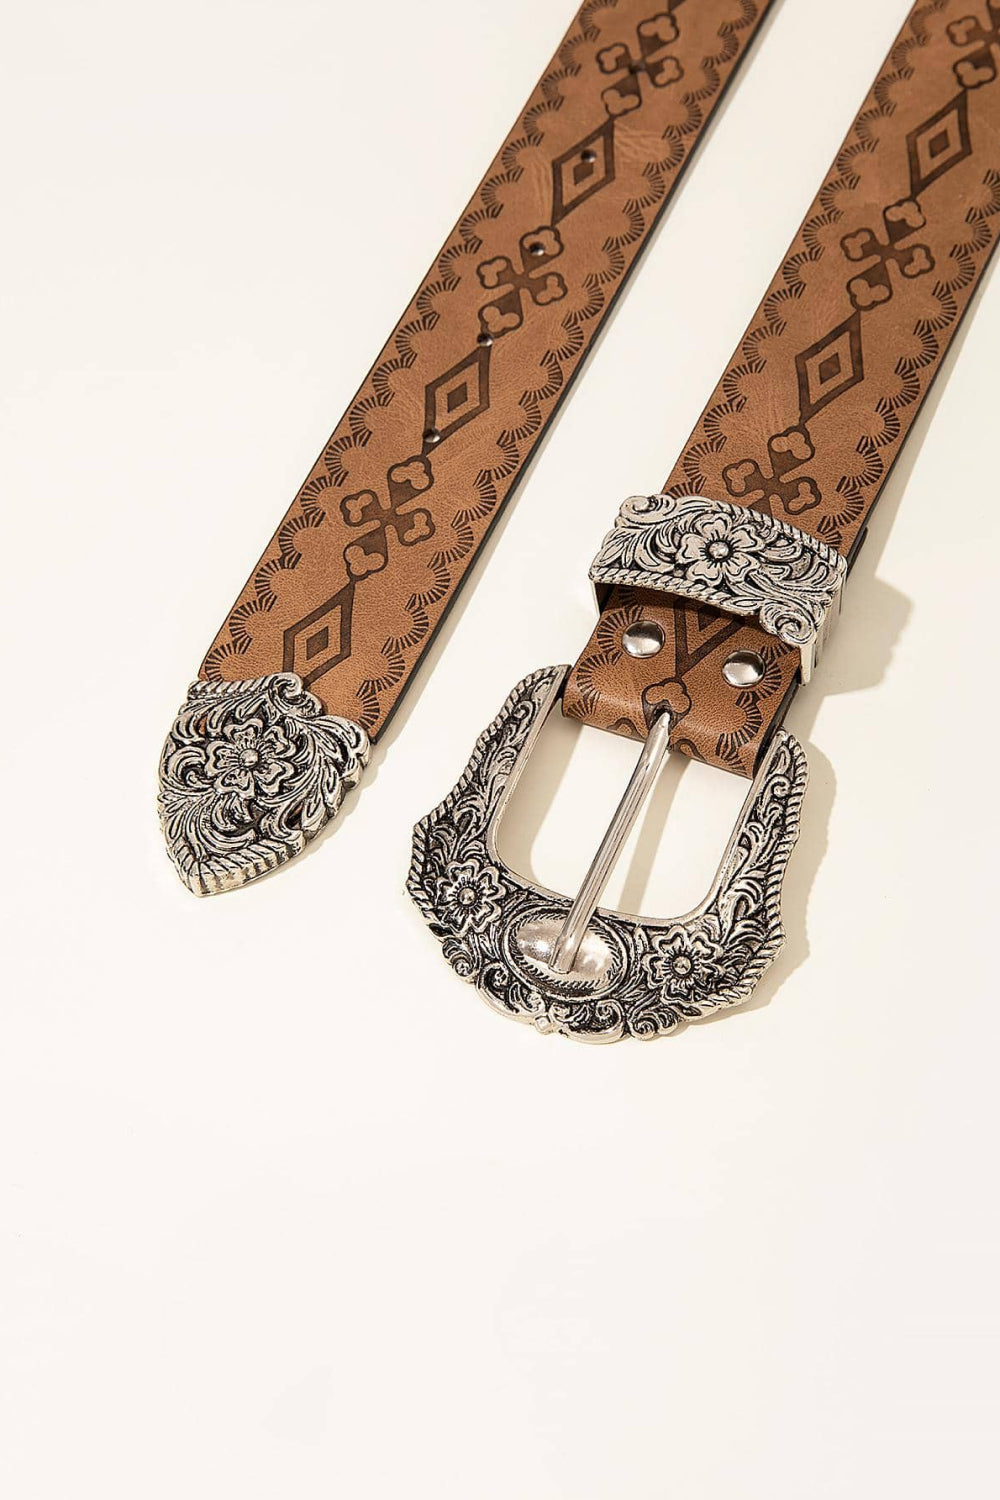 ONLINE EXCLUSIVE Patterned PU Leather Belt